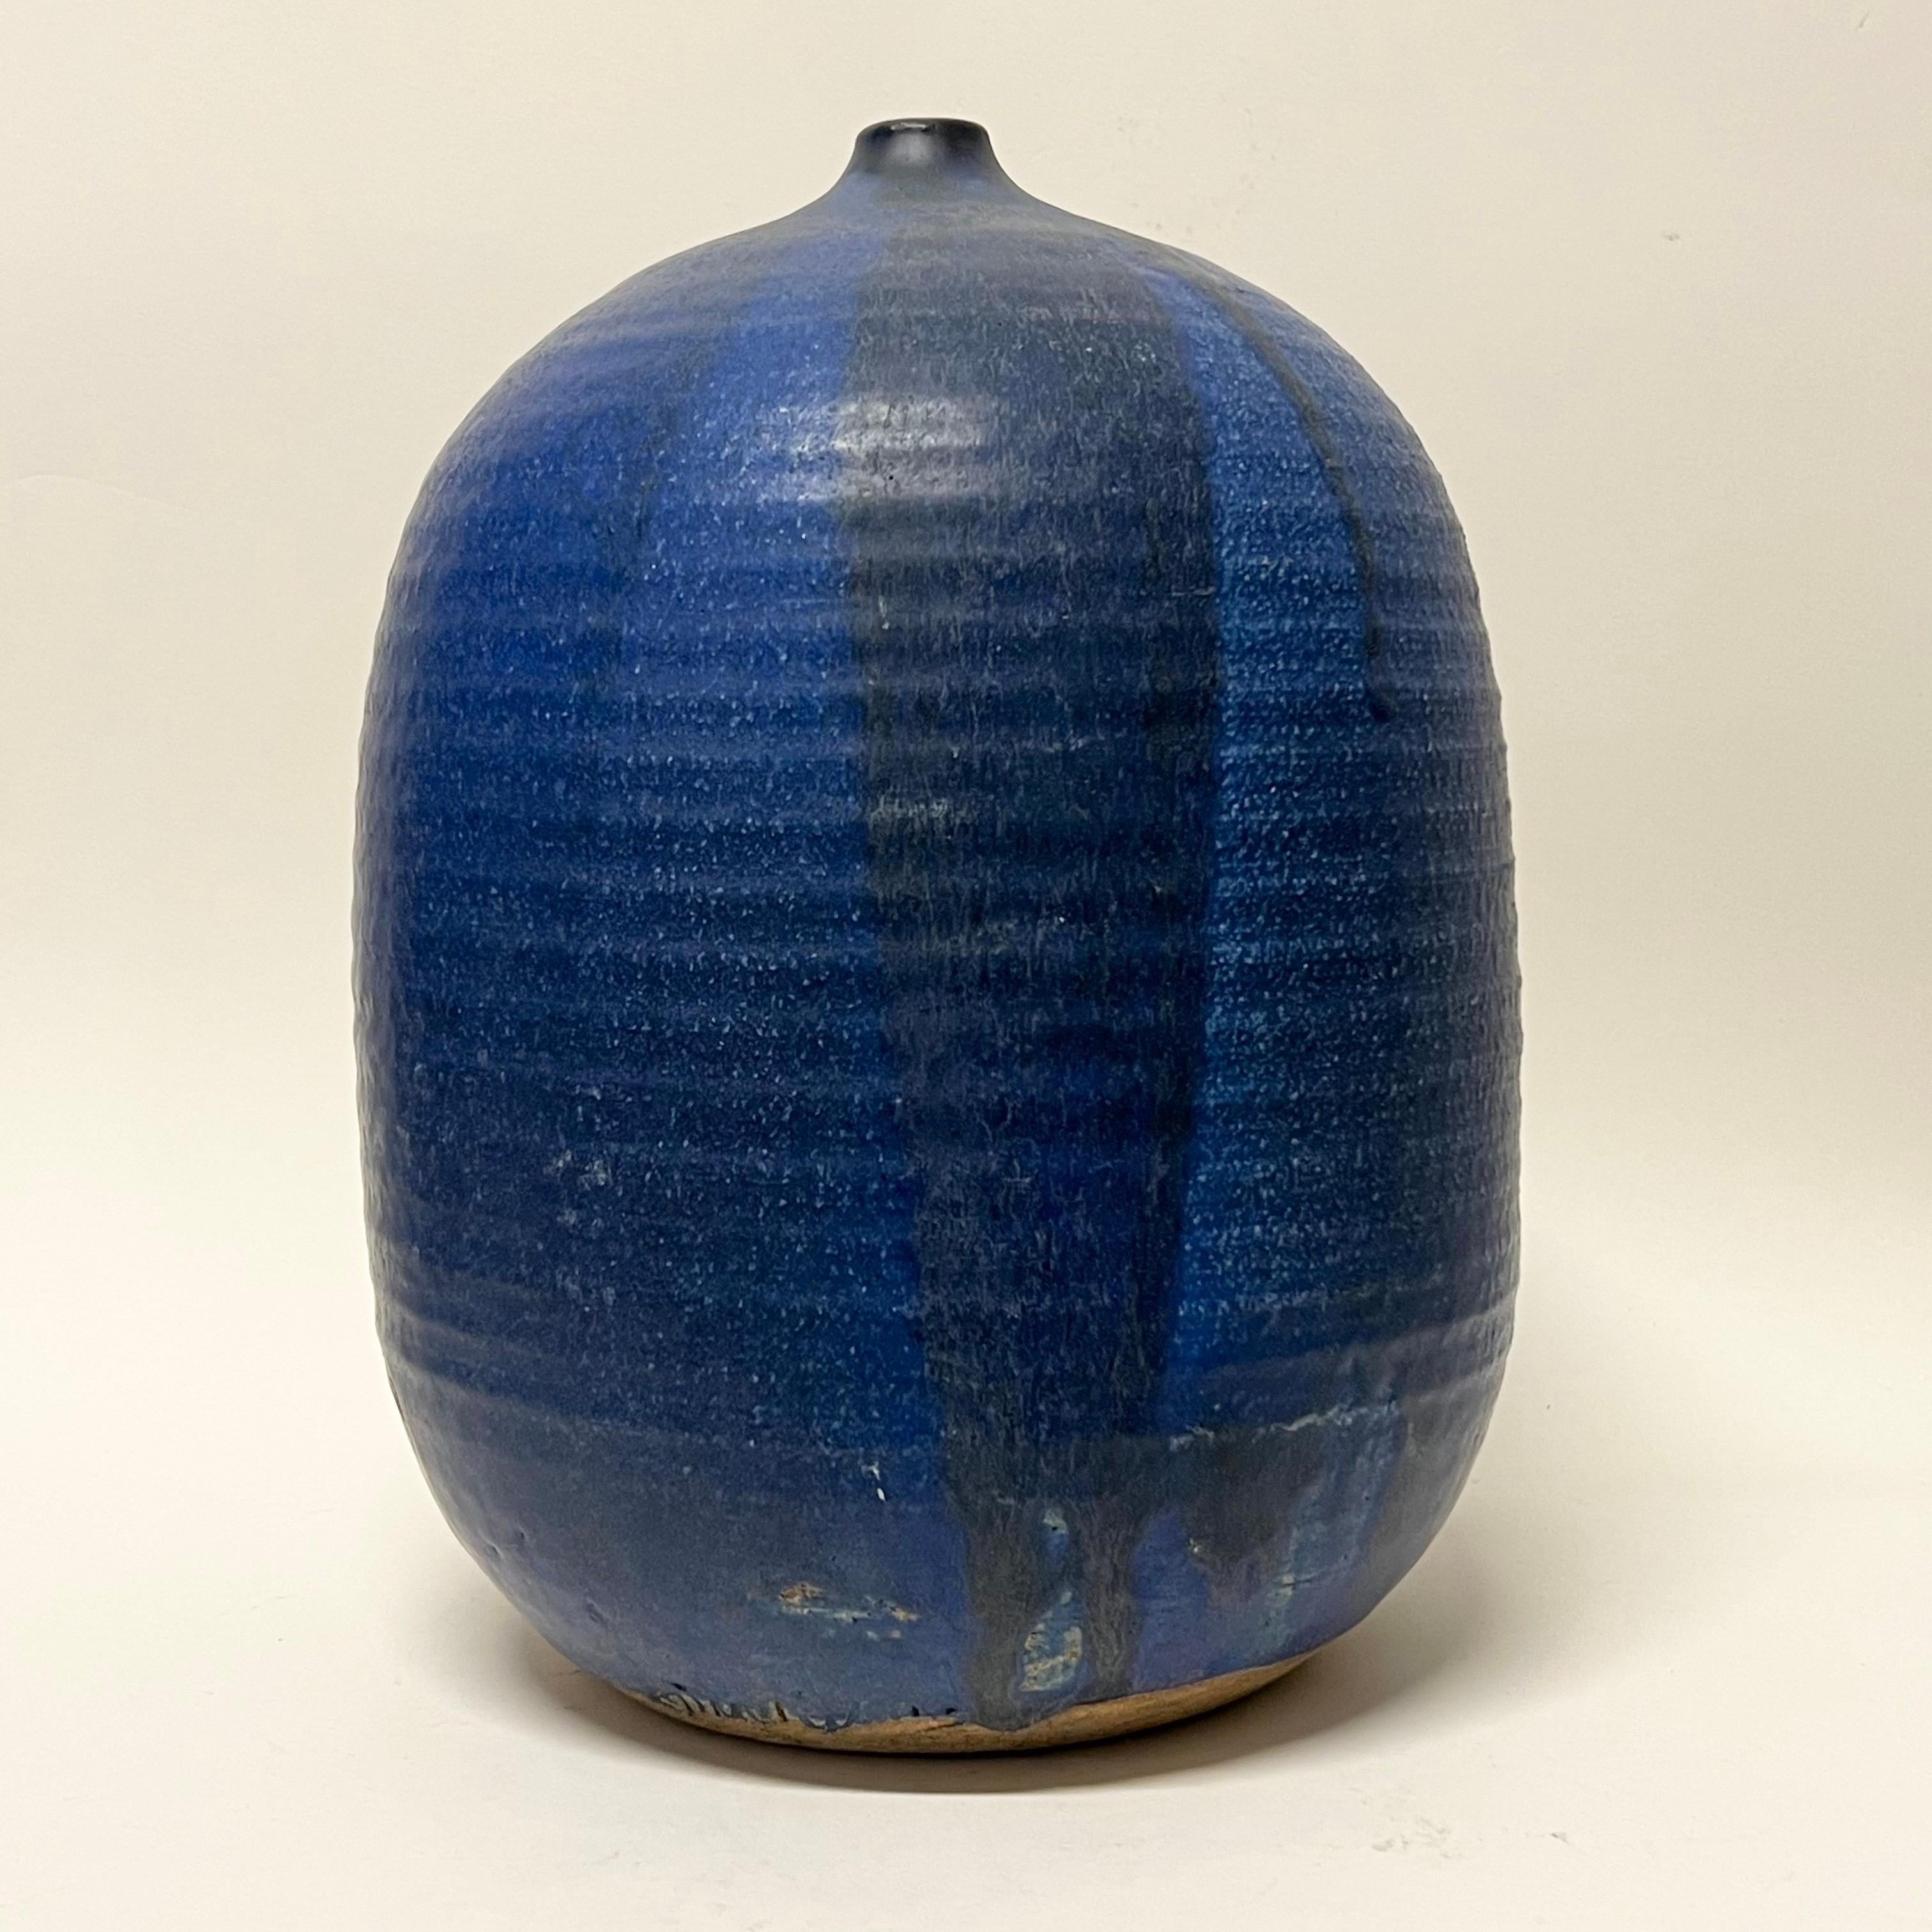 Absolutely stunning cobalt blue large-scale studio ceramic moon pot in the manner of Toshiko Takaezu. Signed illegibly. Amazing form.